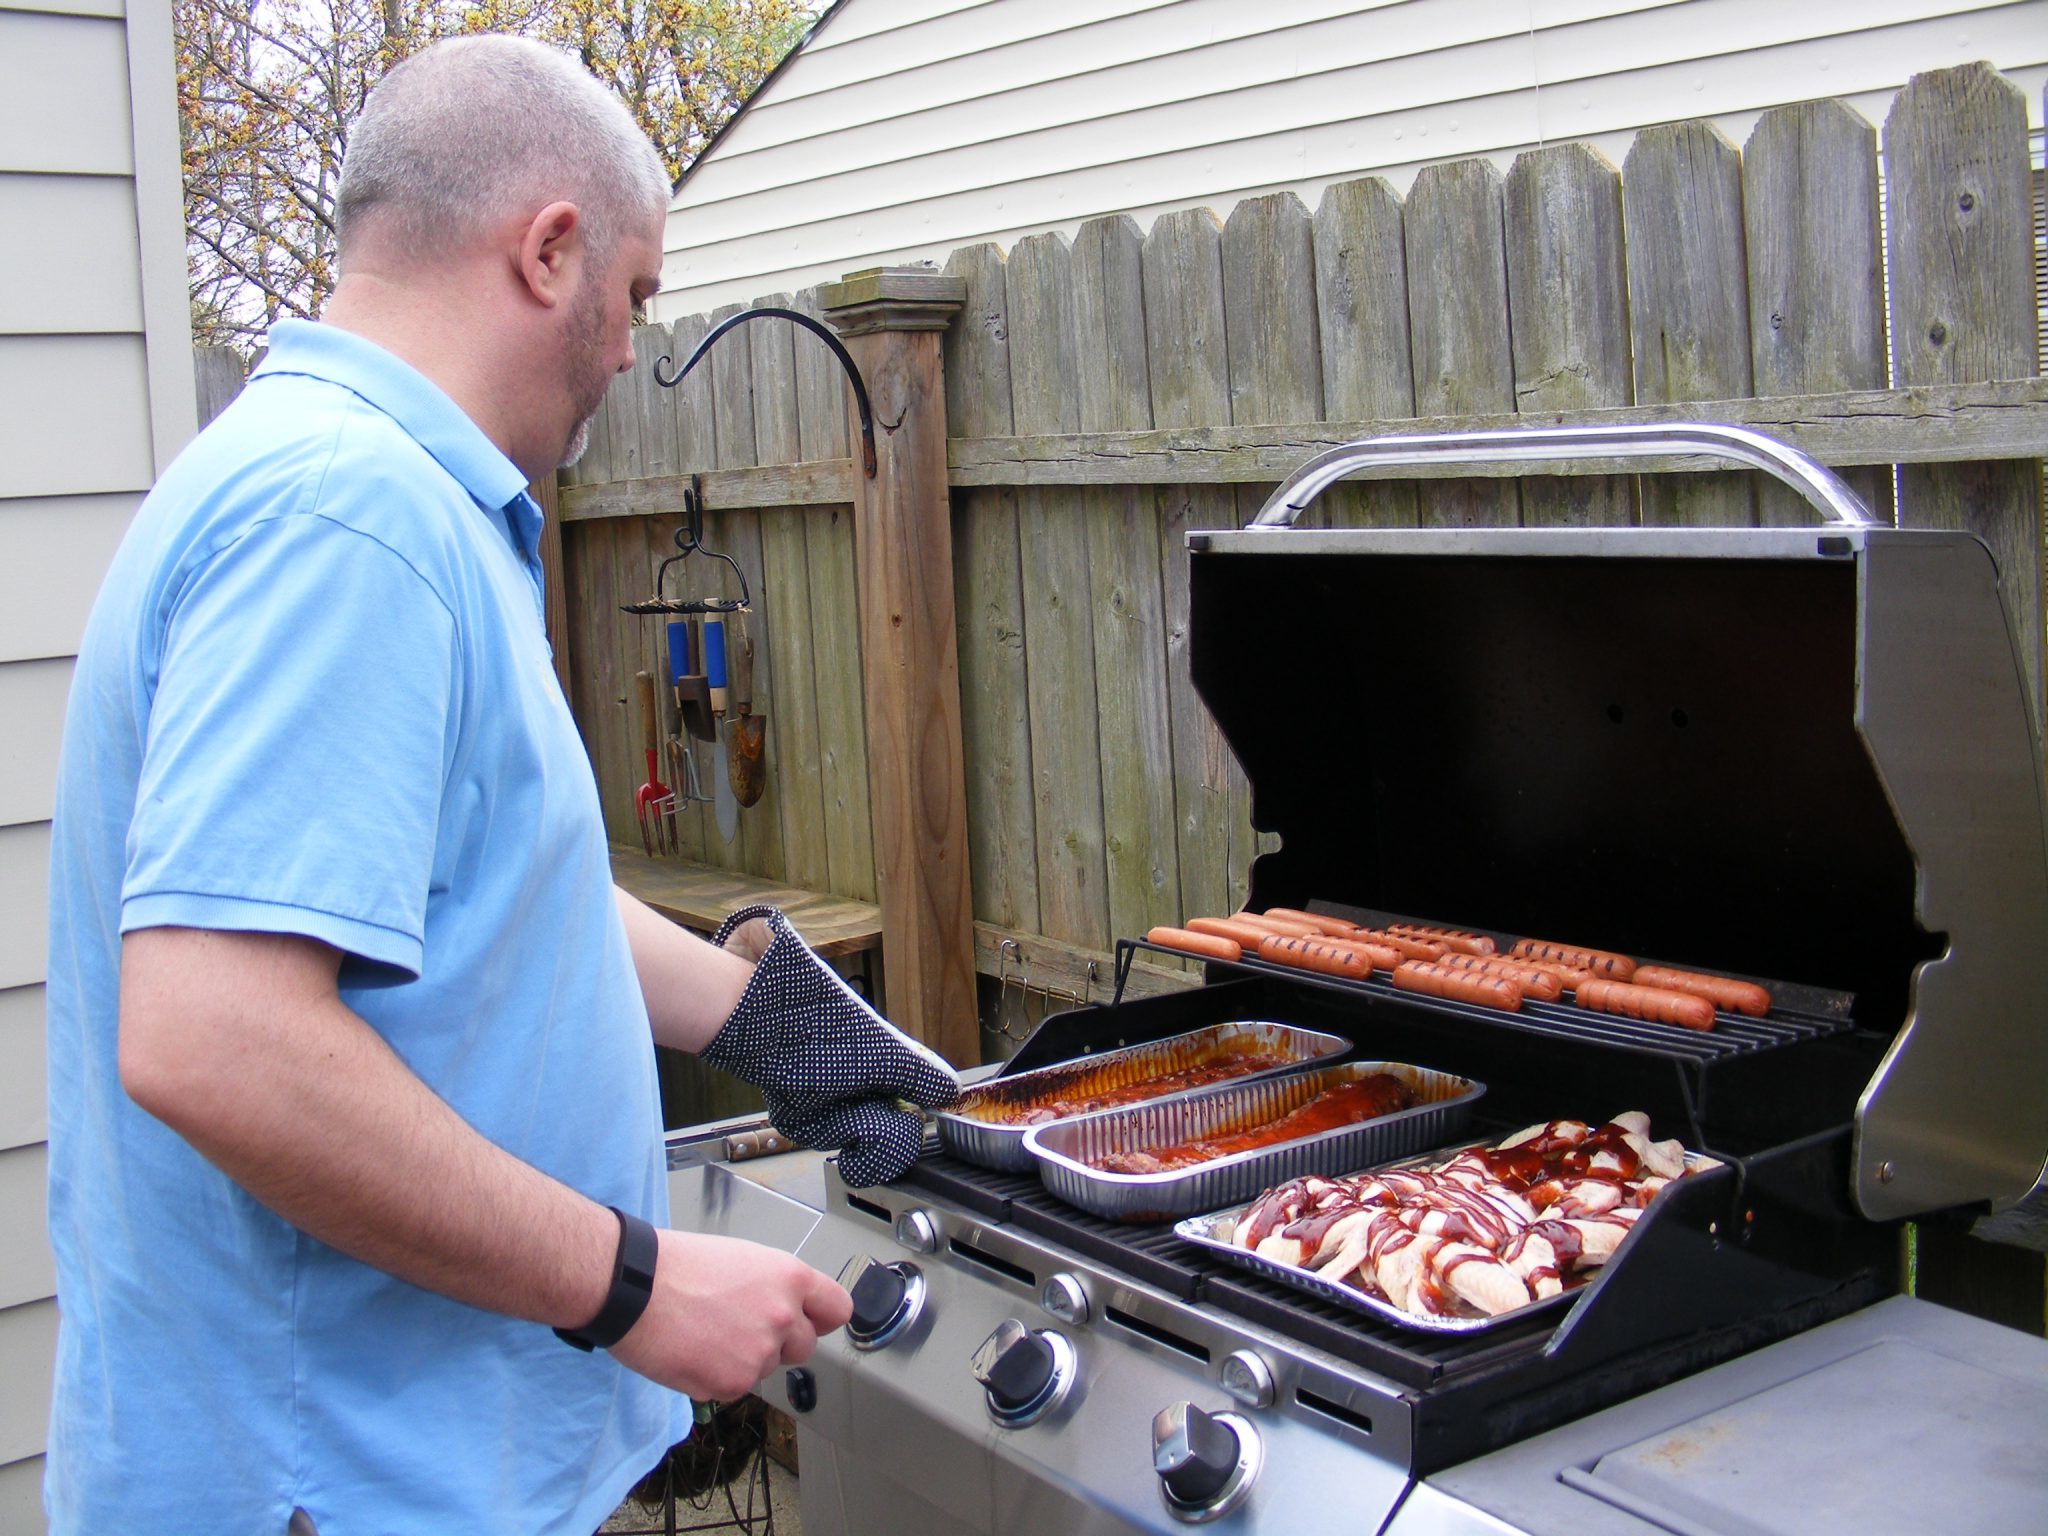 Alan cooking for the family in a gas smoker.